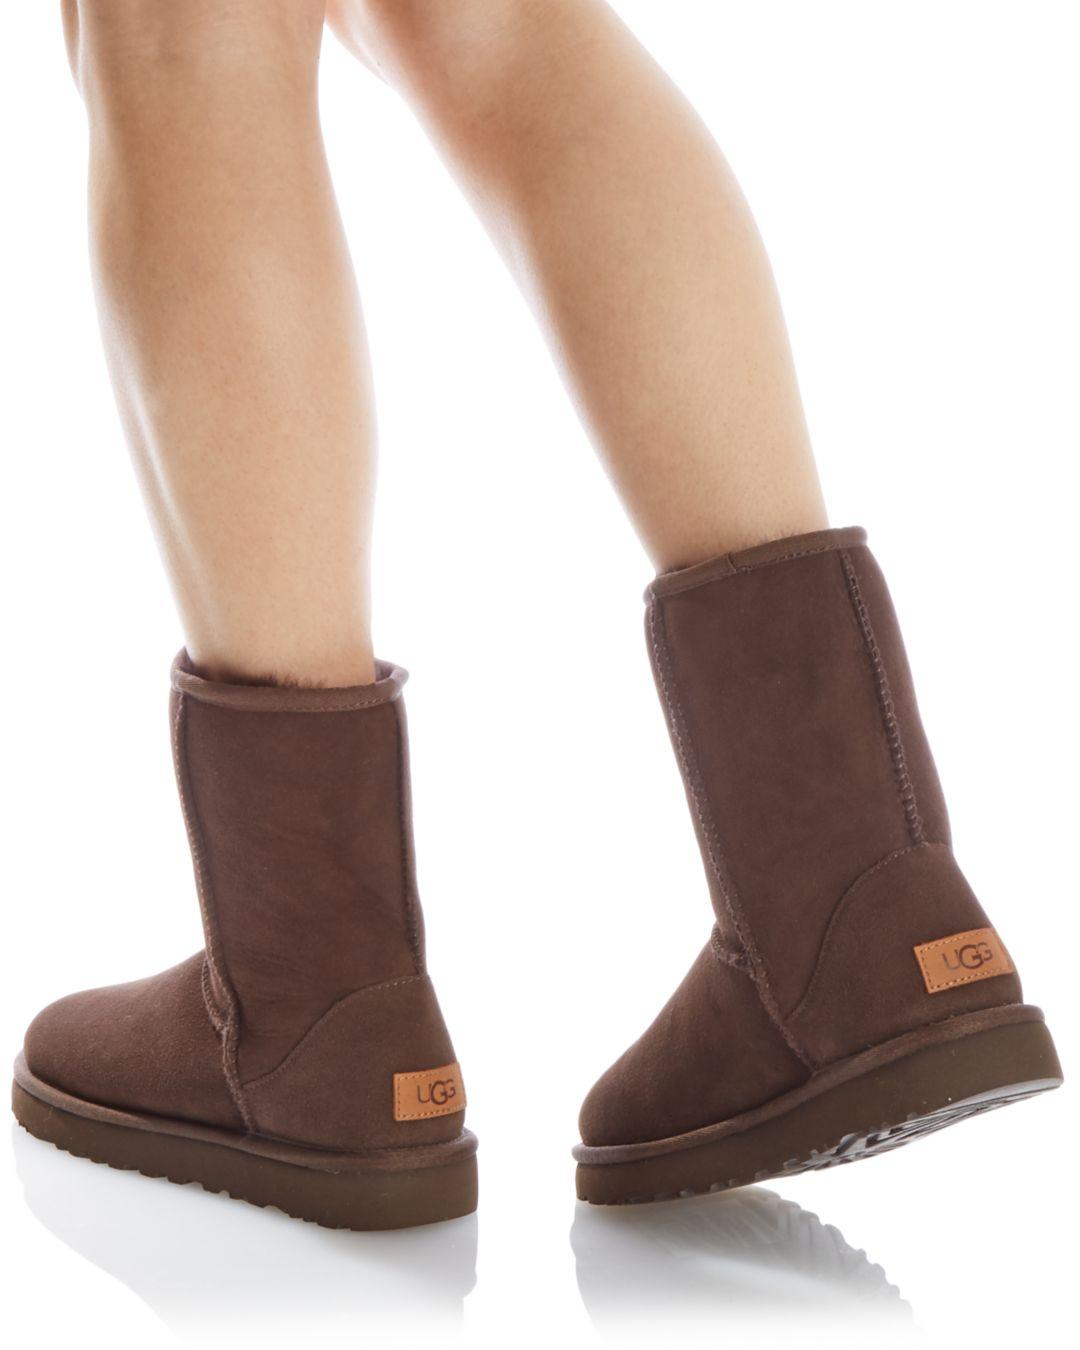 chocolate brown short ugg boots, deep discount off 52% - www.wingspantg.com